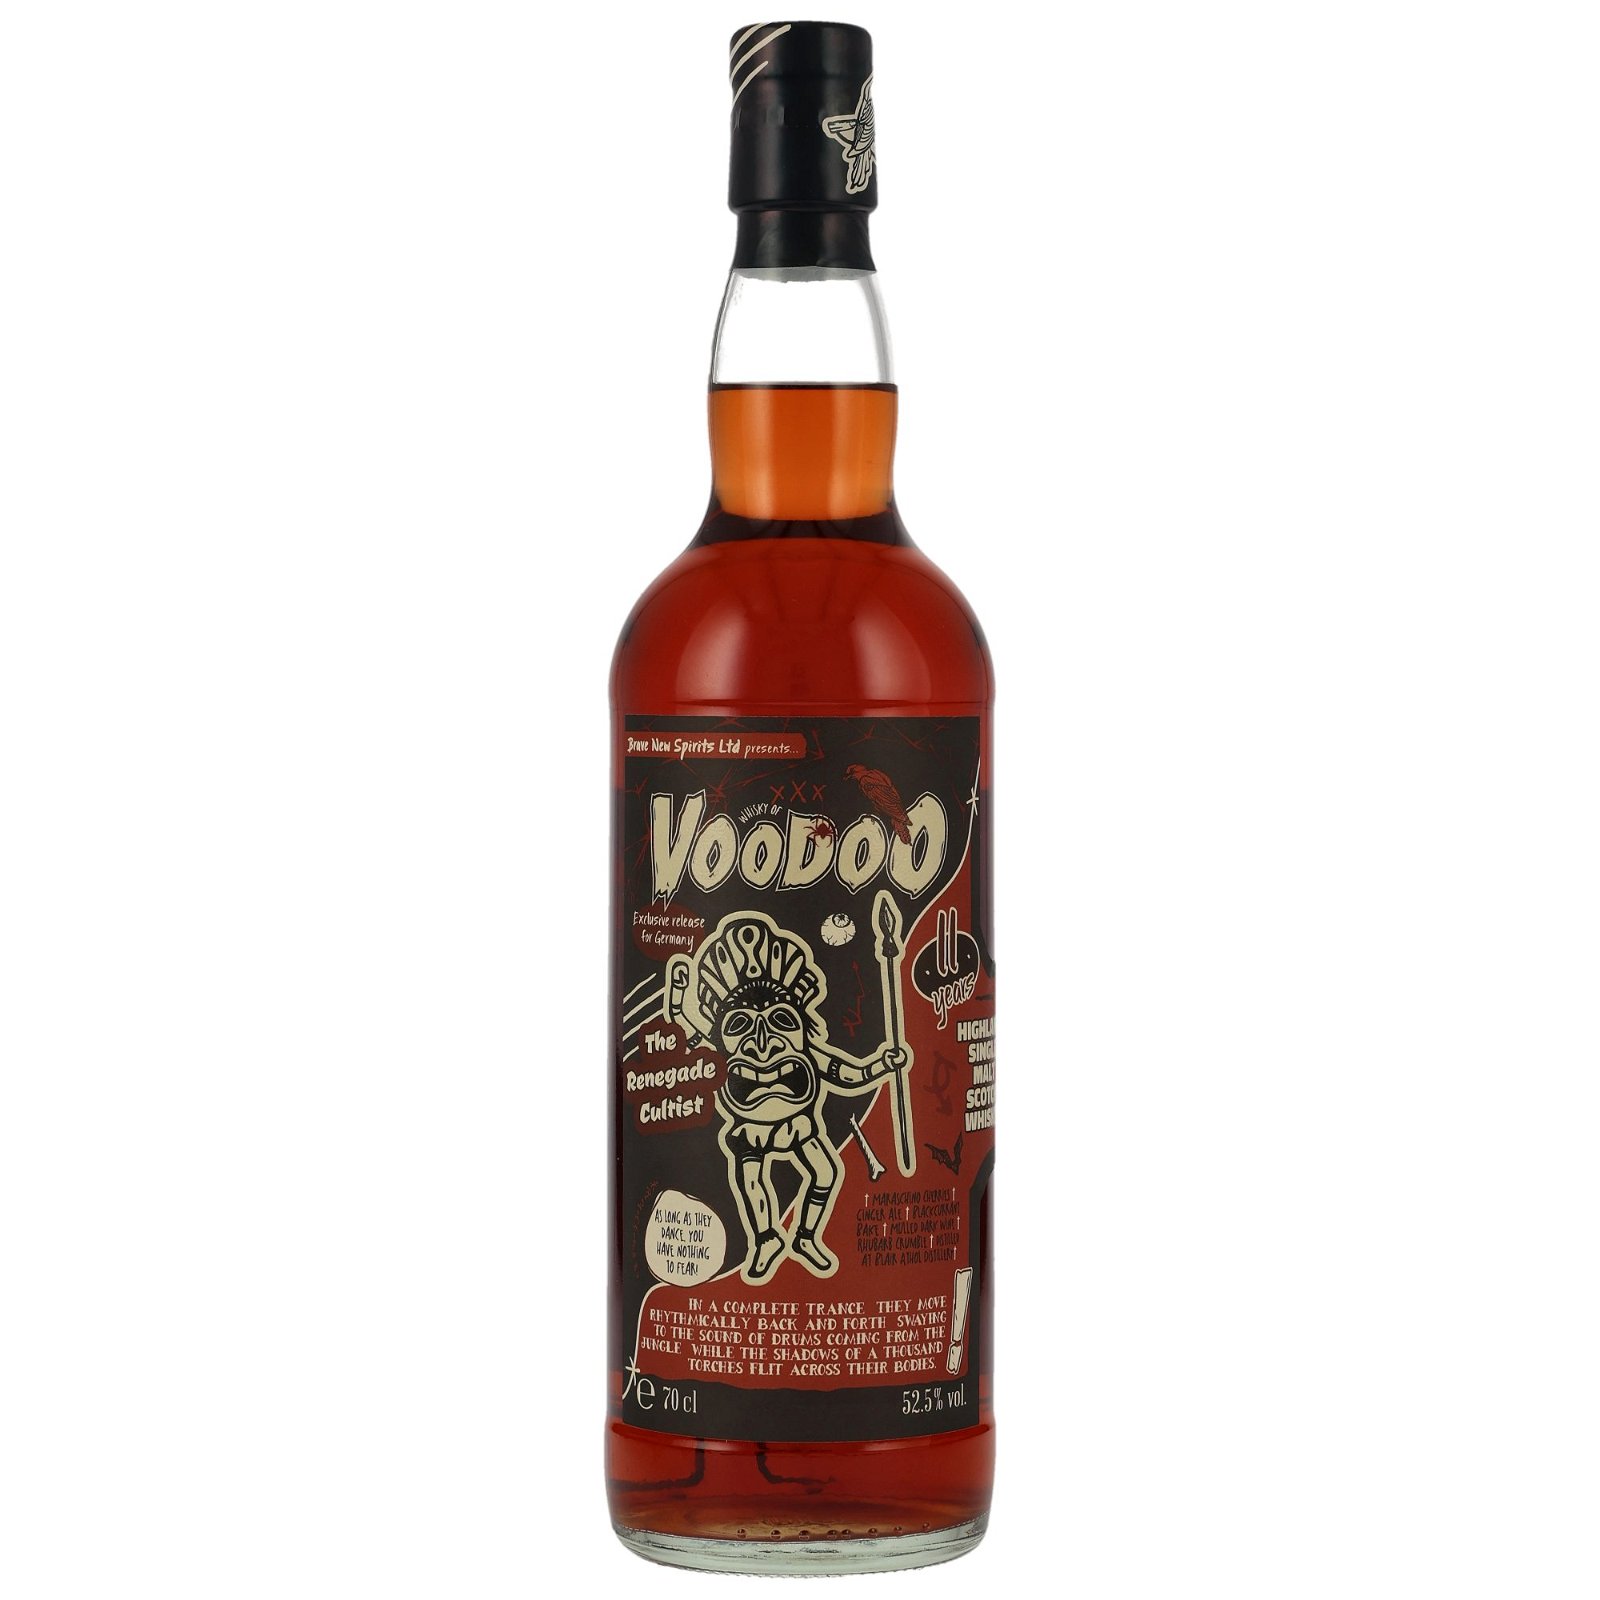 Whisky of Voodoo 11 Jahre The Renegade Cultist (Brave New Spirits)